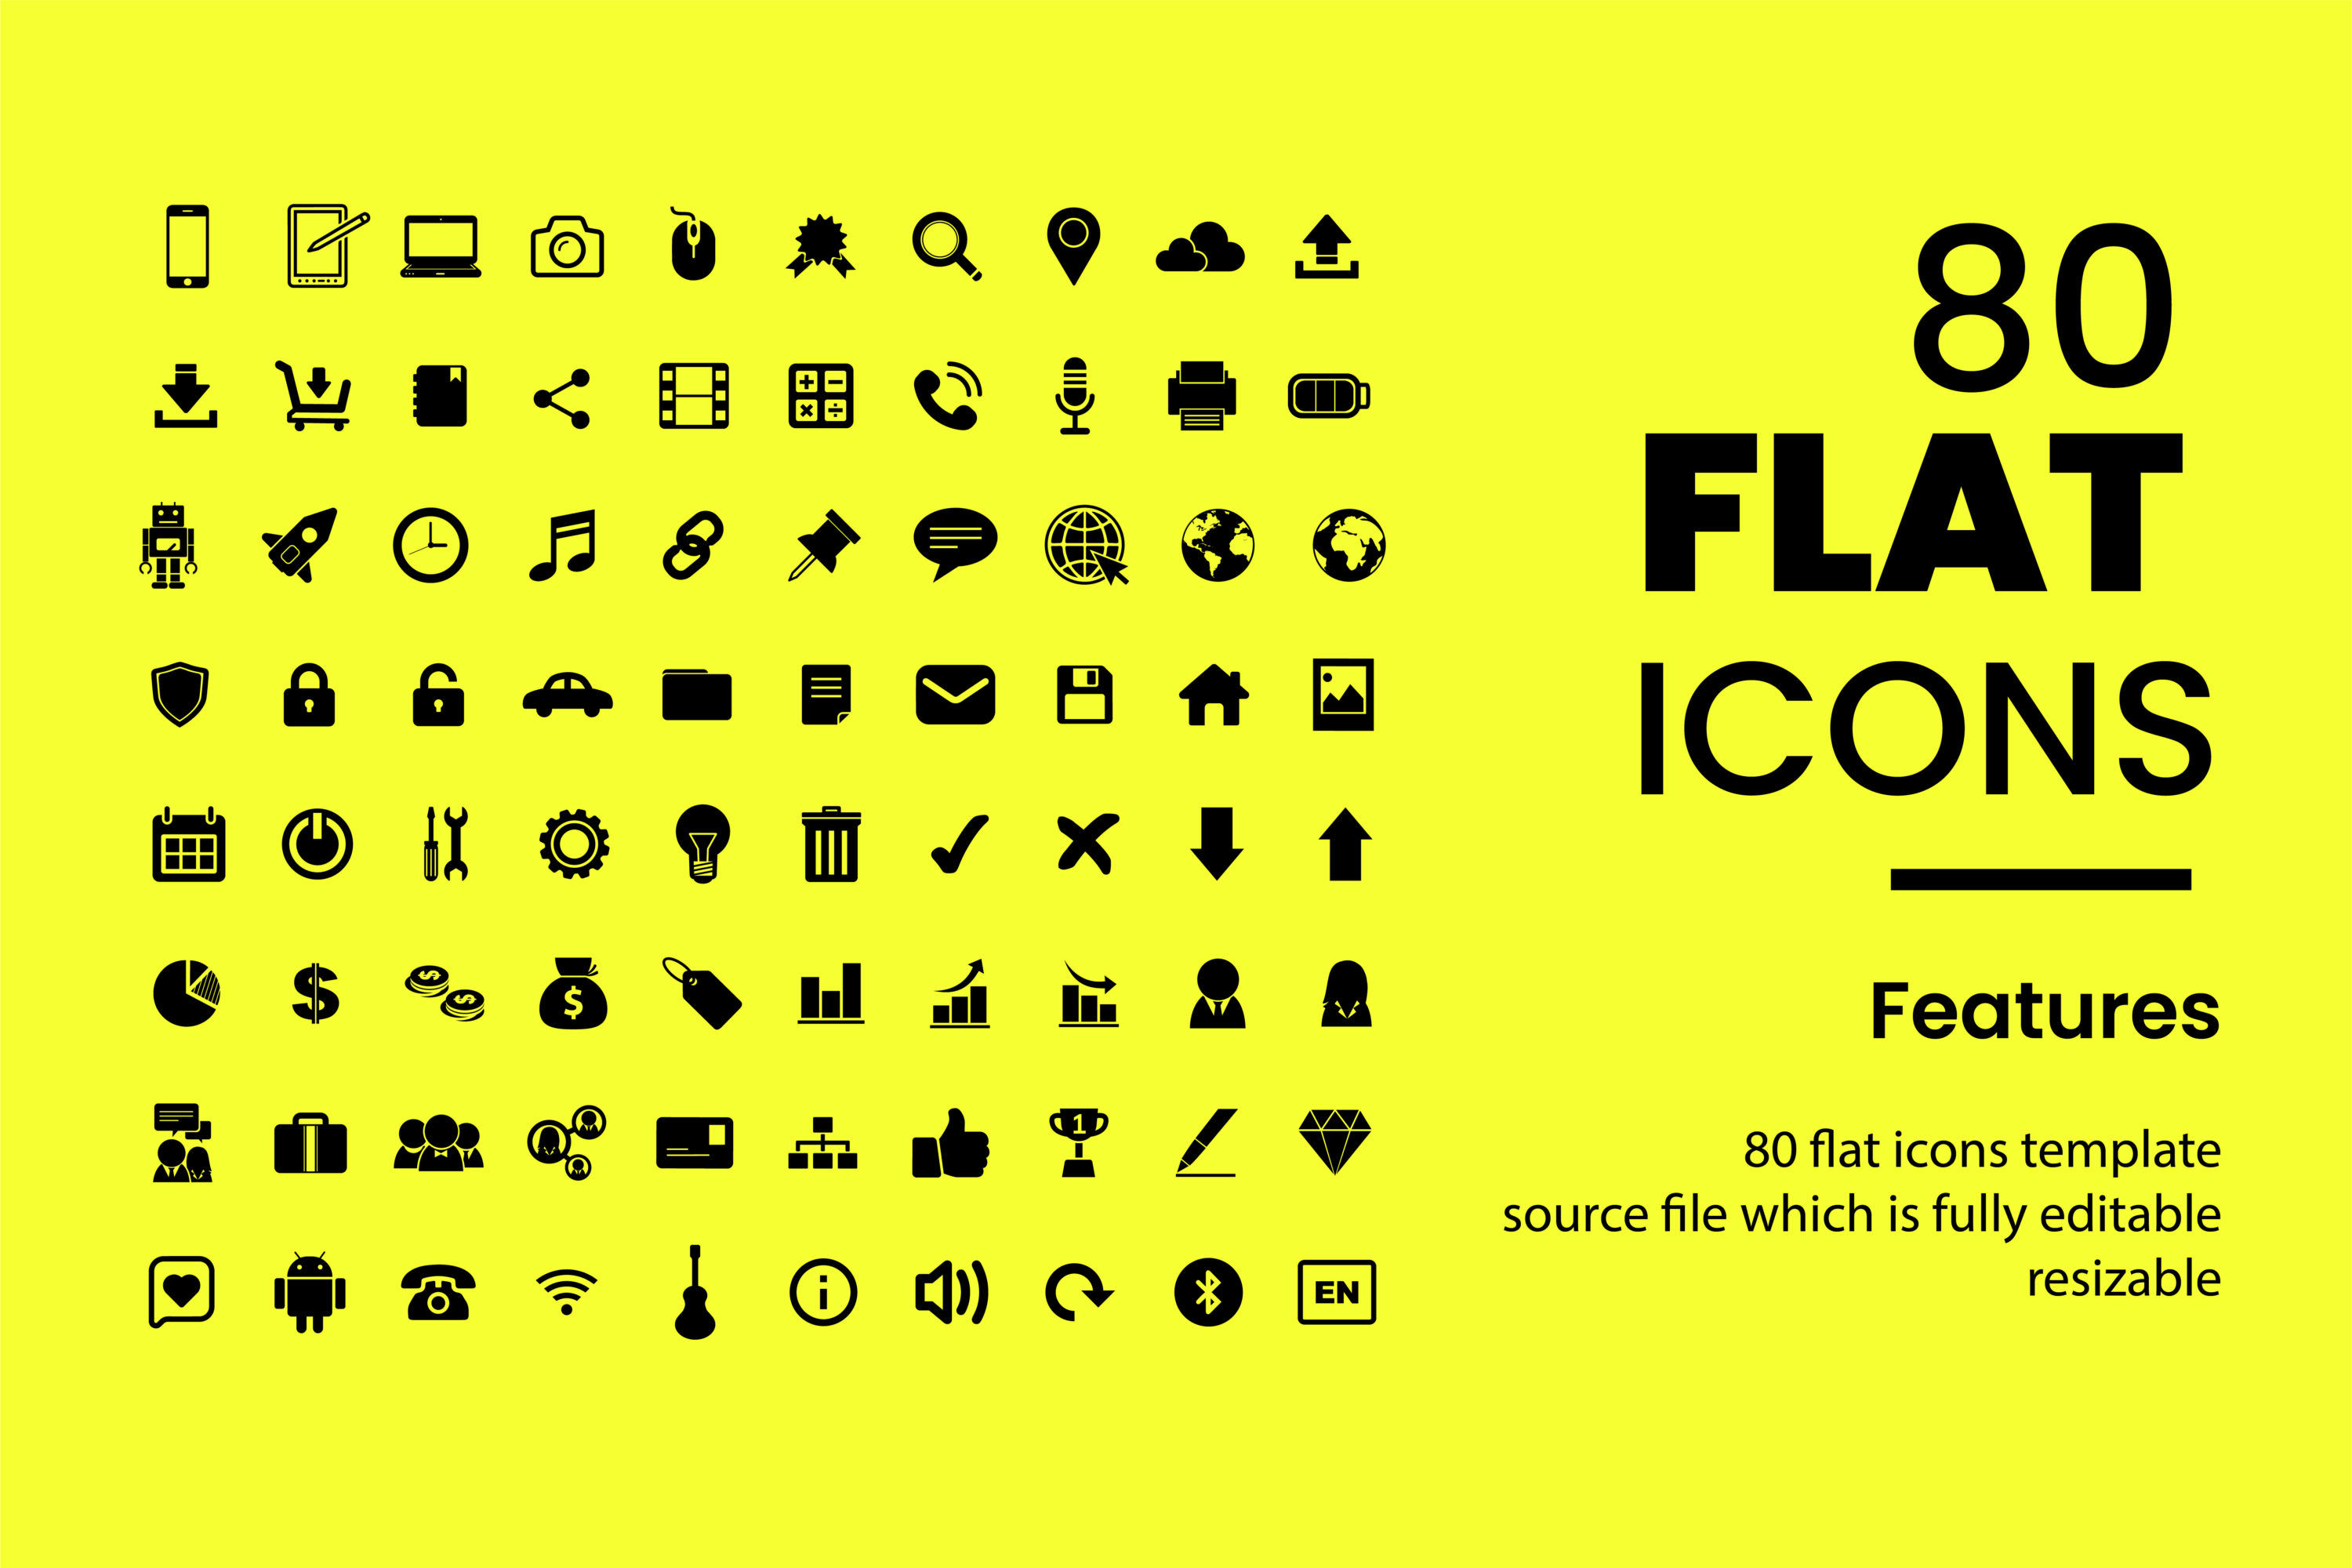 The pack includes 80 flat icons Template for you to use and modify as your own.